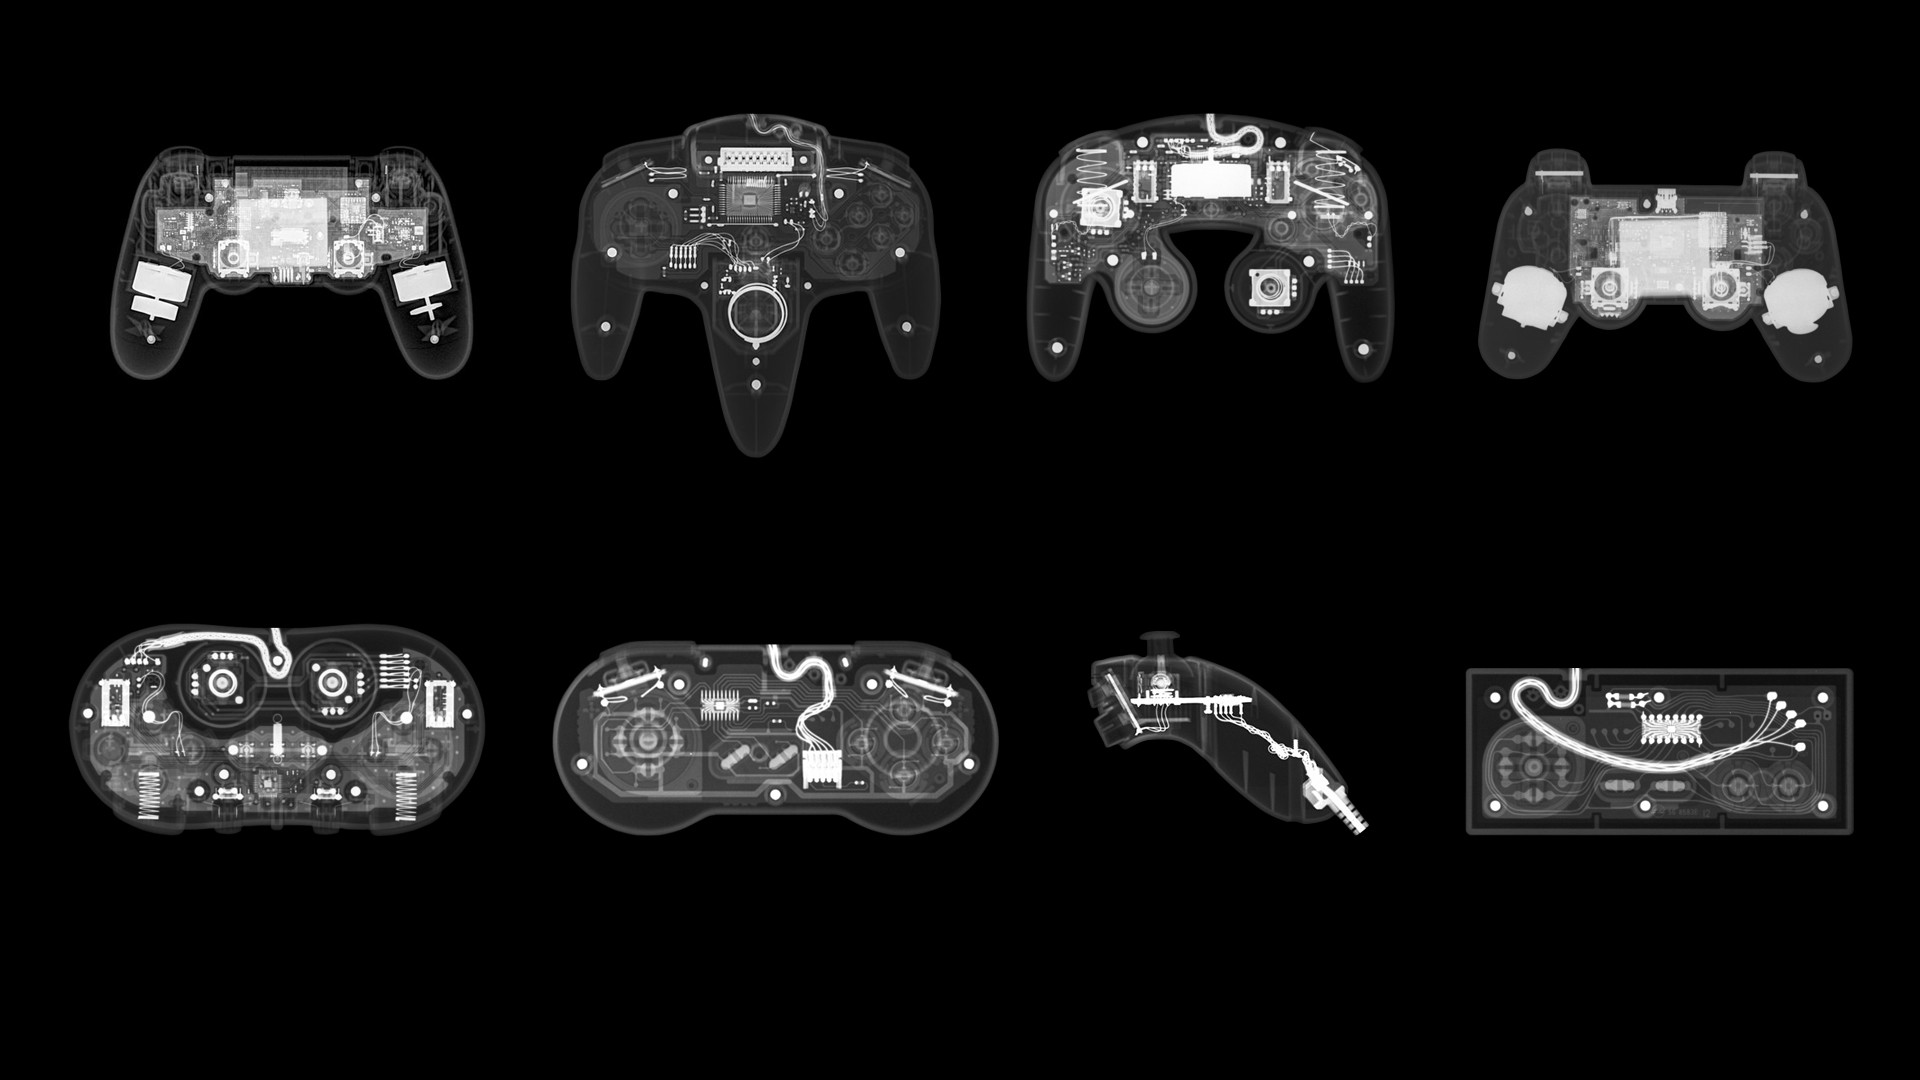 Game Controller Photos Download The BEST Free Game Controller Stock Photos   HD Images